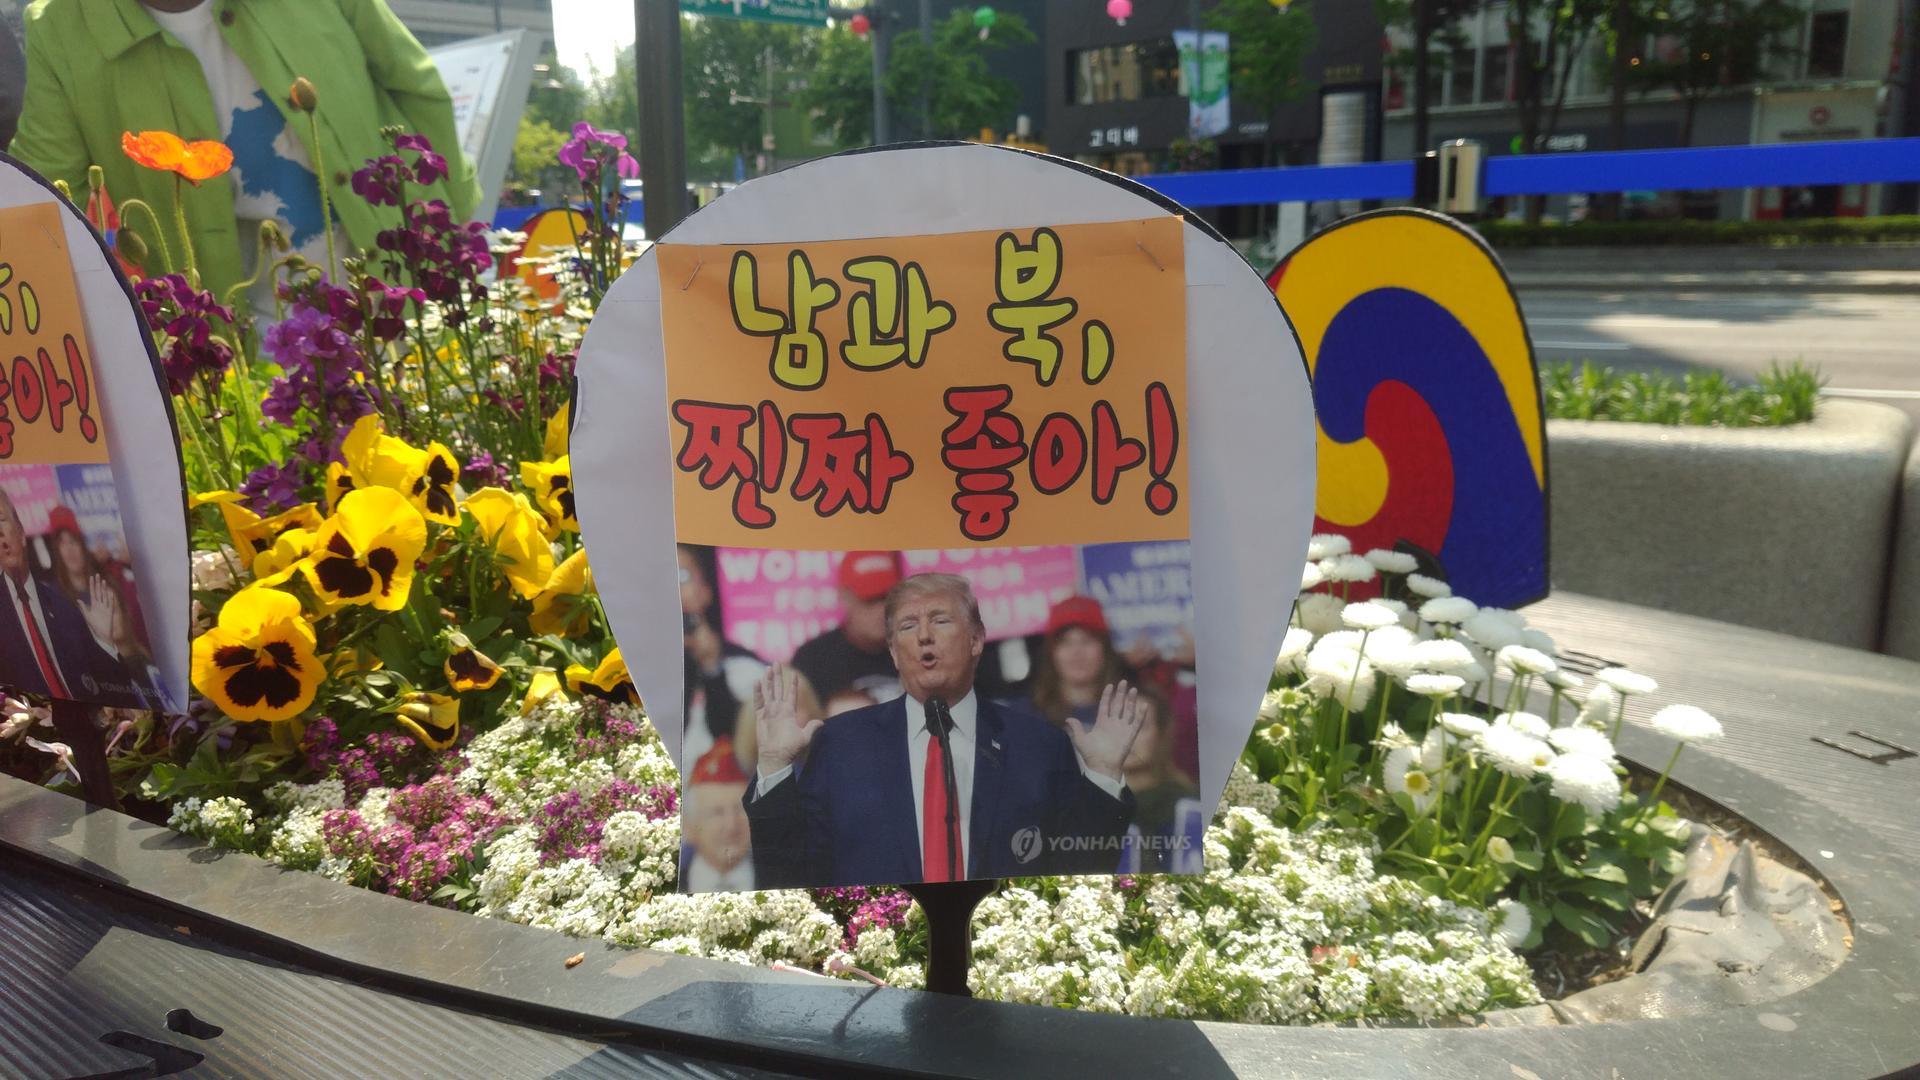 Demonstrators for peace planted signs depicting U.S. President Donald Trump saying 